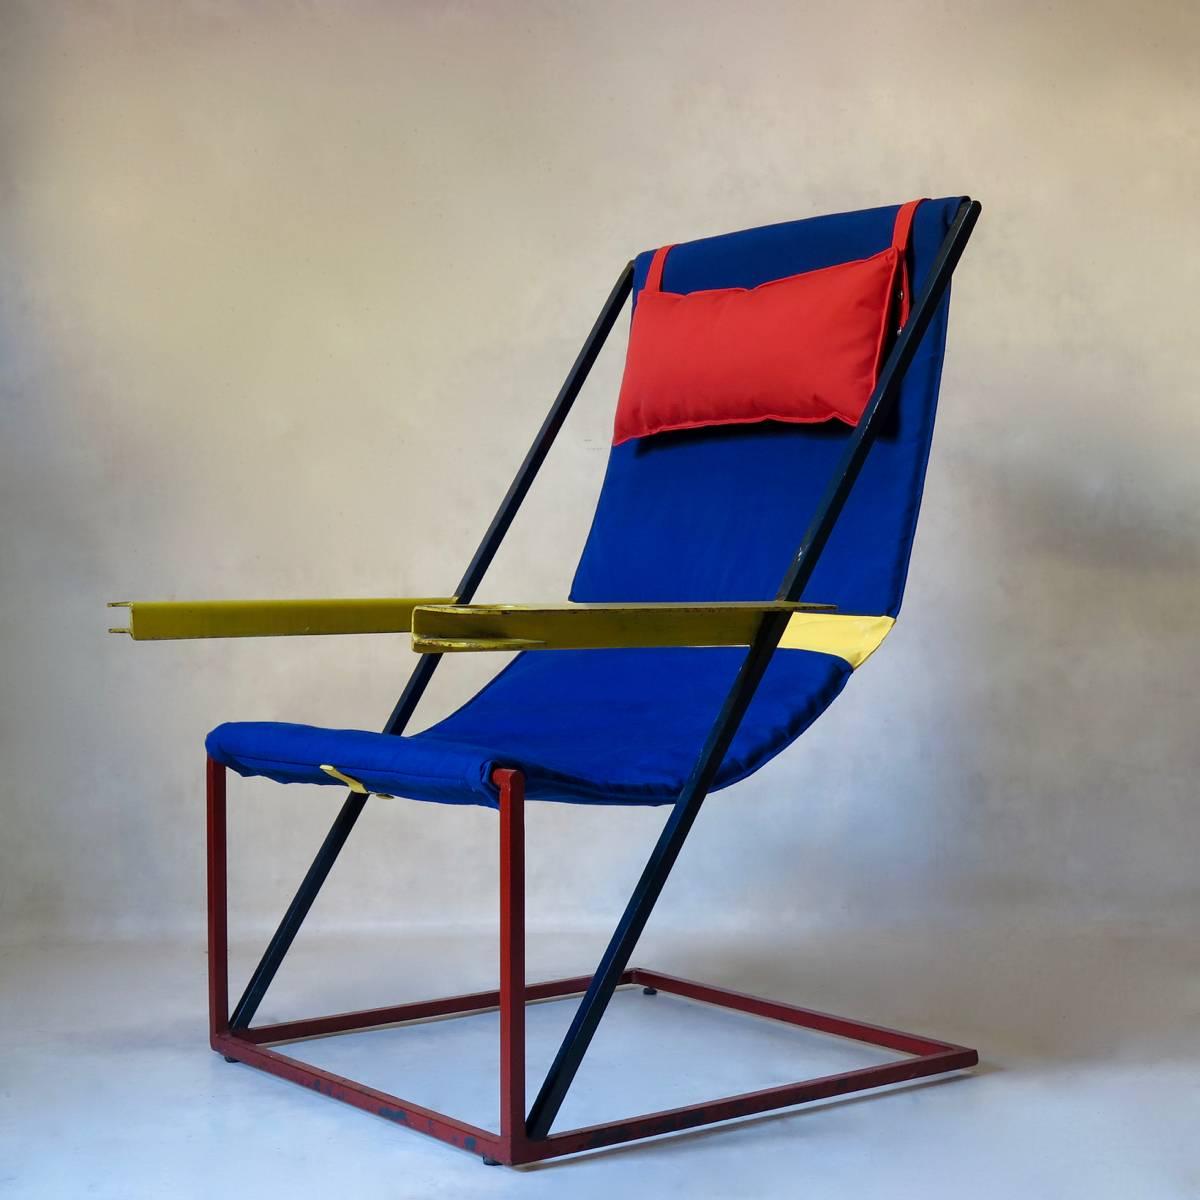 French Jumbo Modernist Chairs, France, circa 1950s For Sale